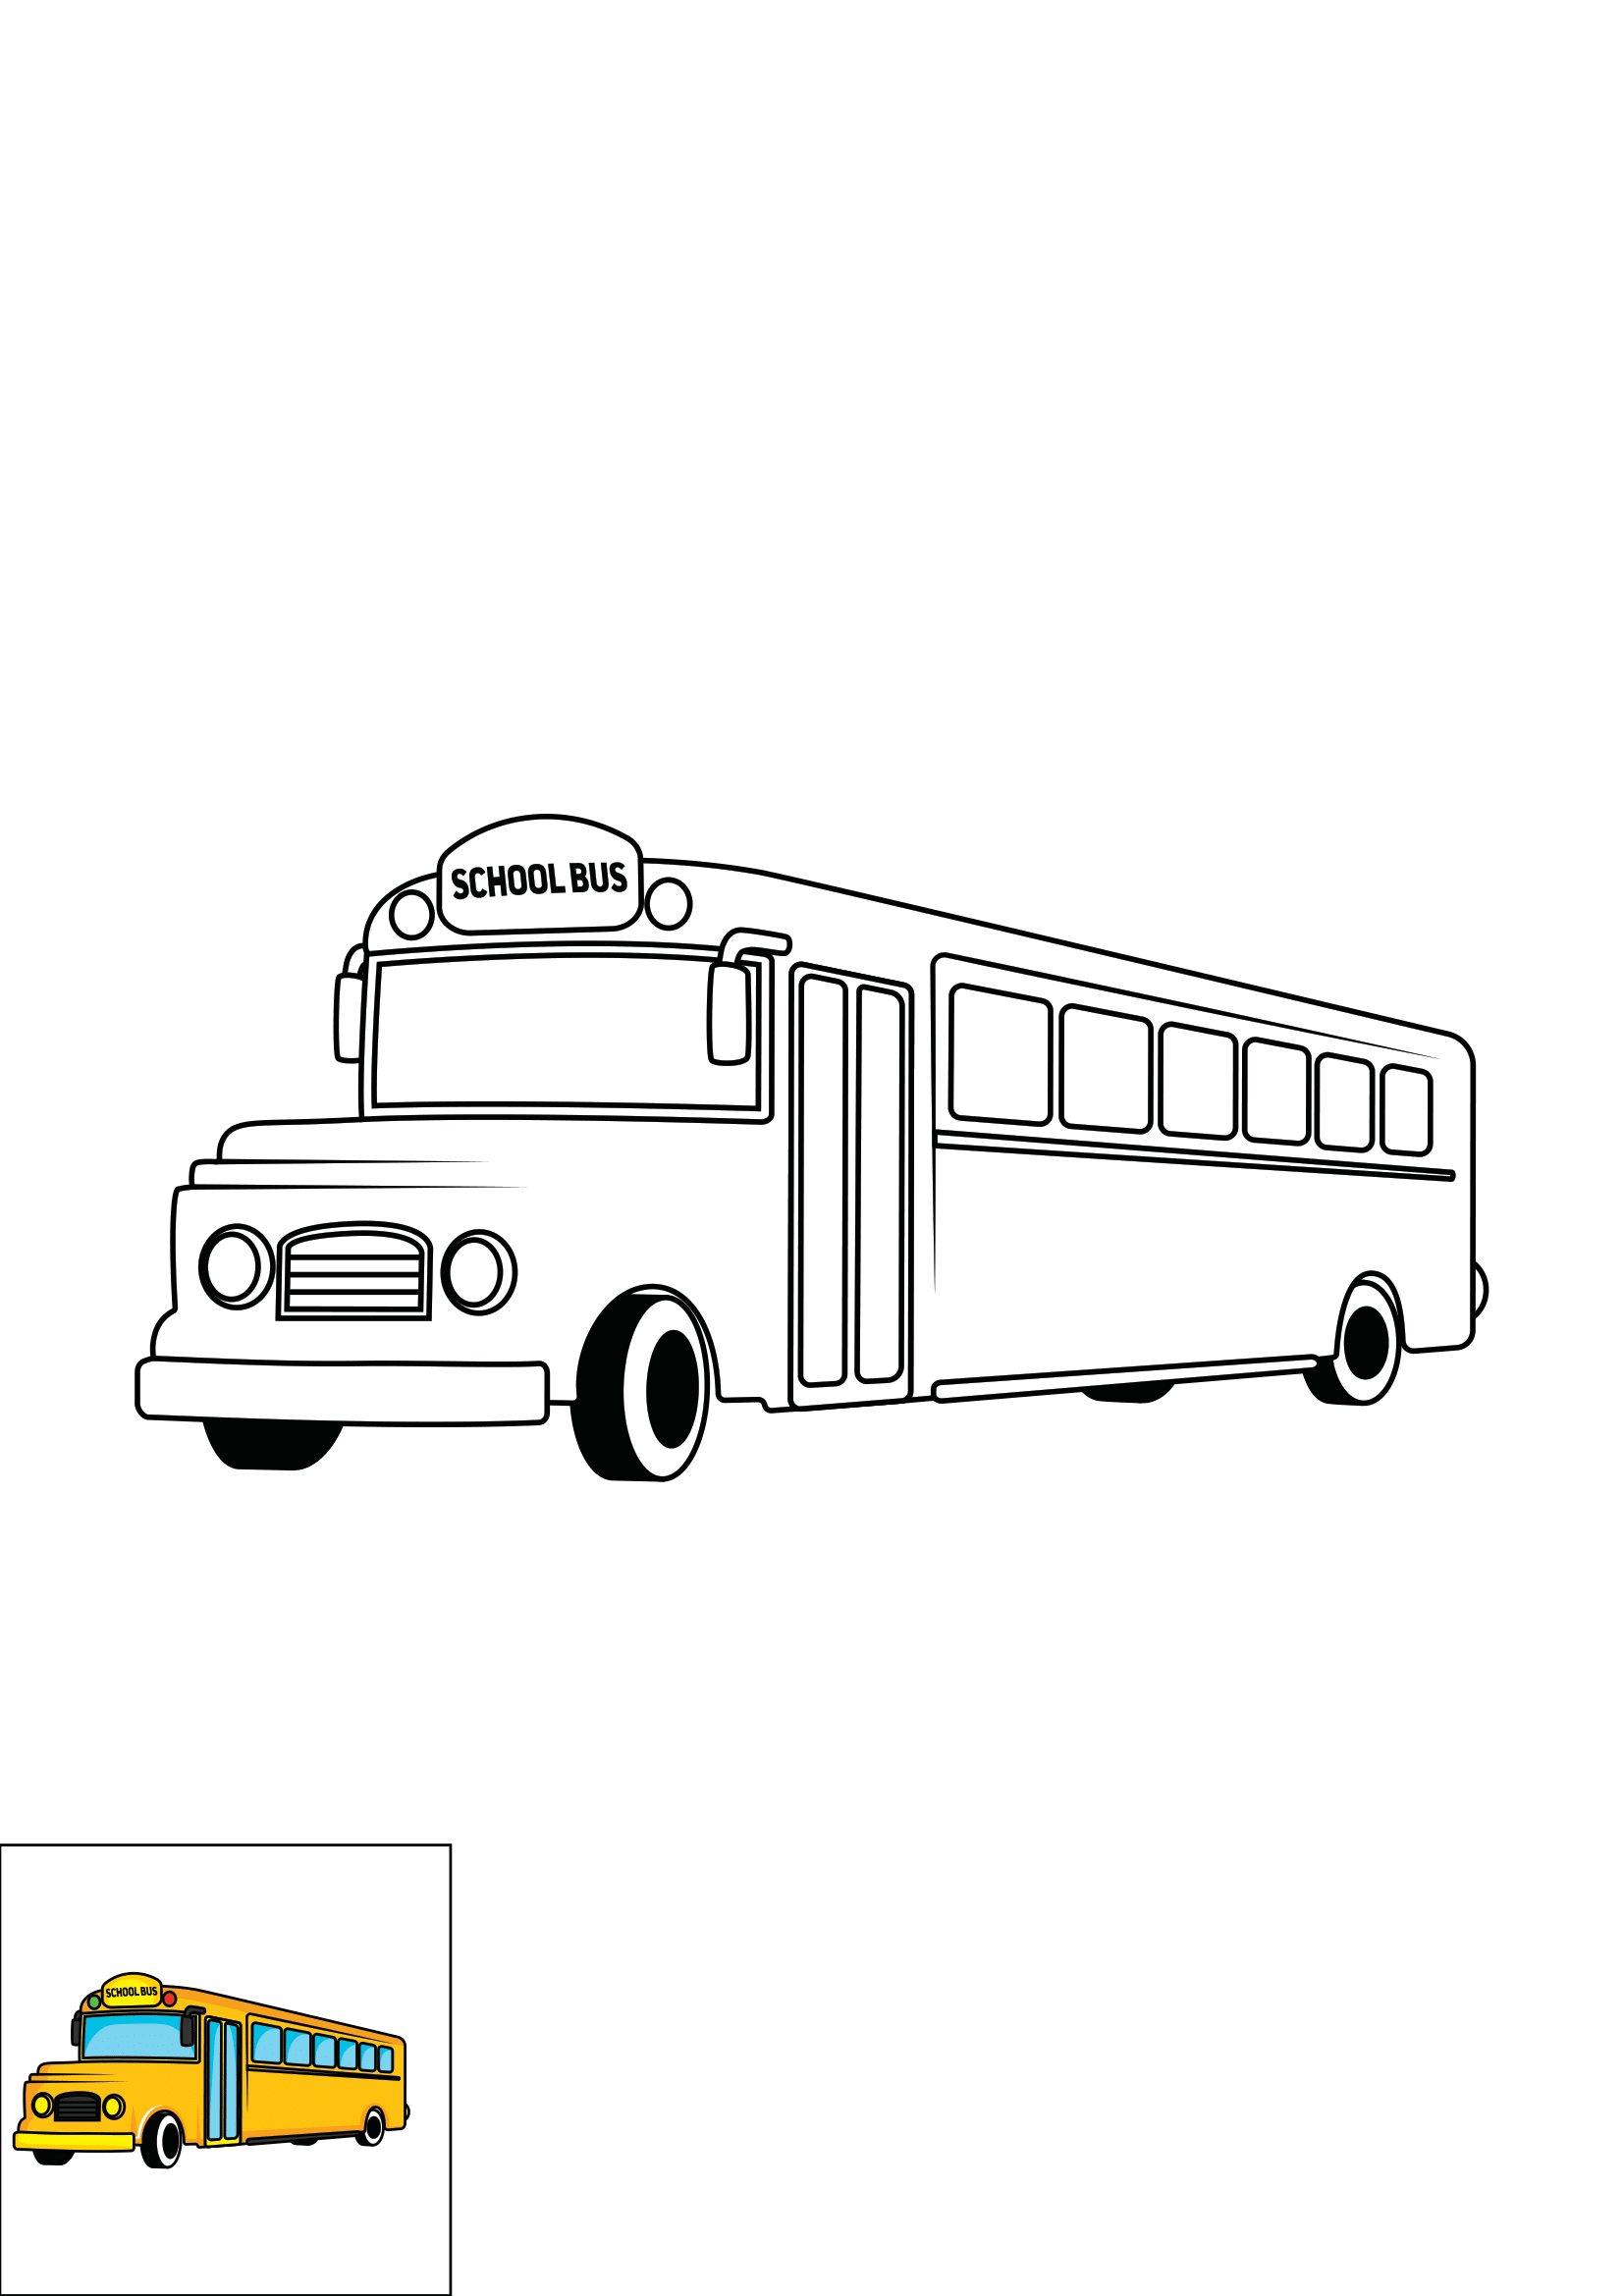 How to Draw A School Bus Step by Step Printable Color